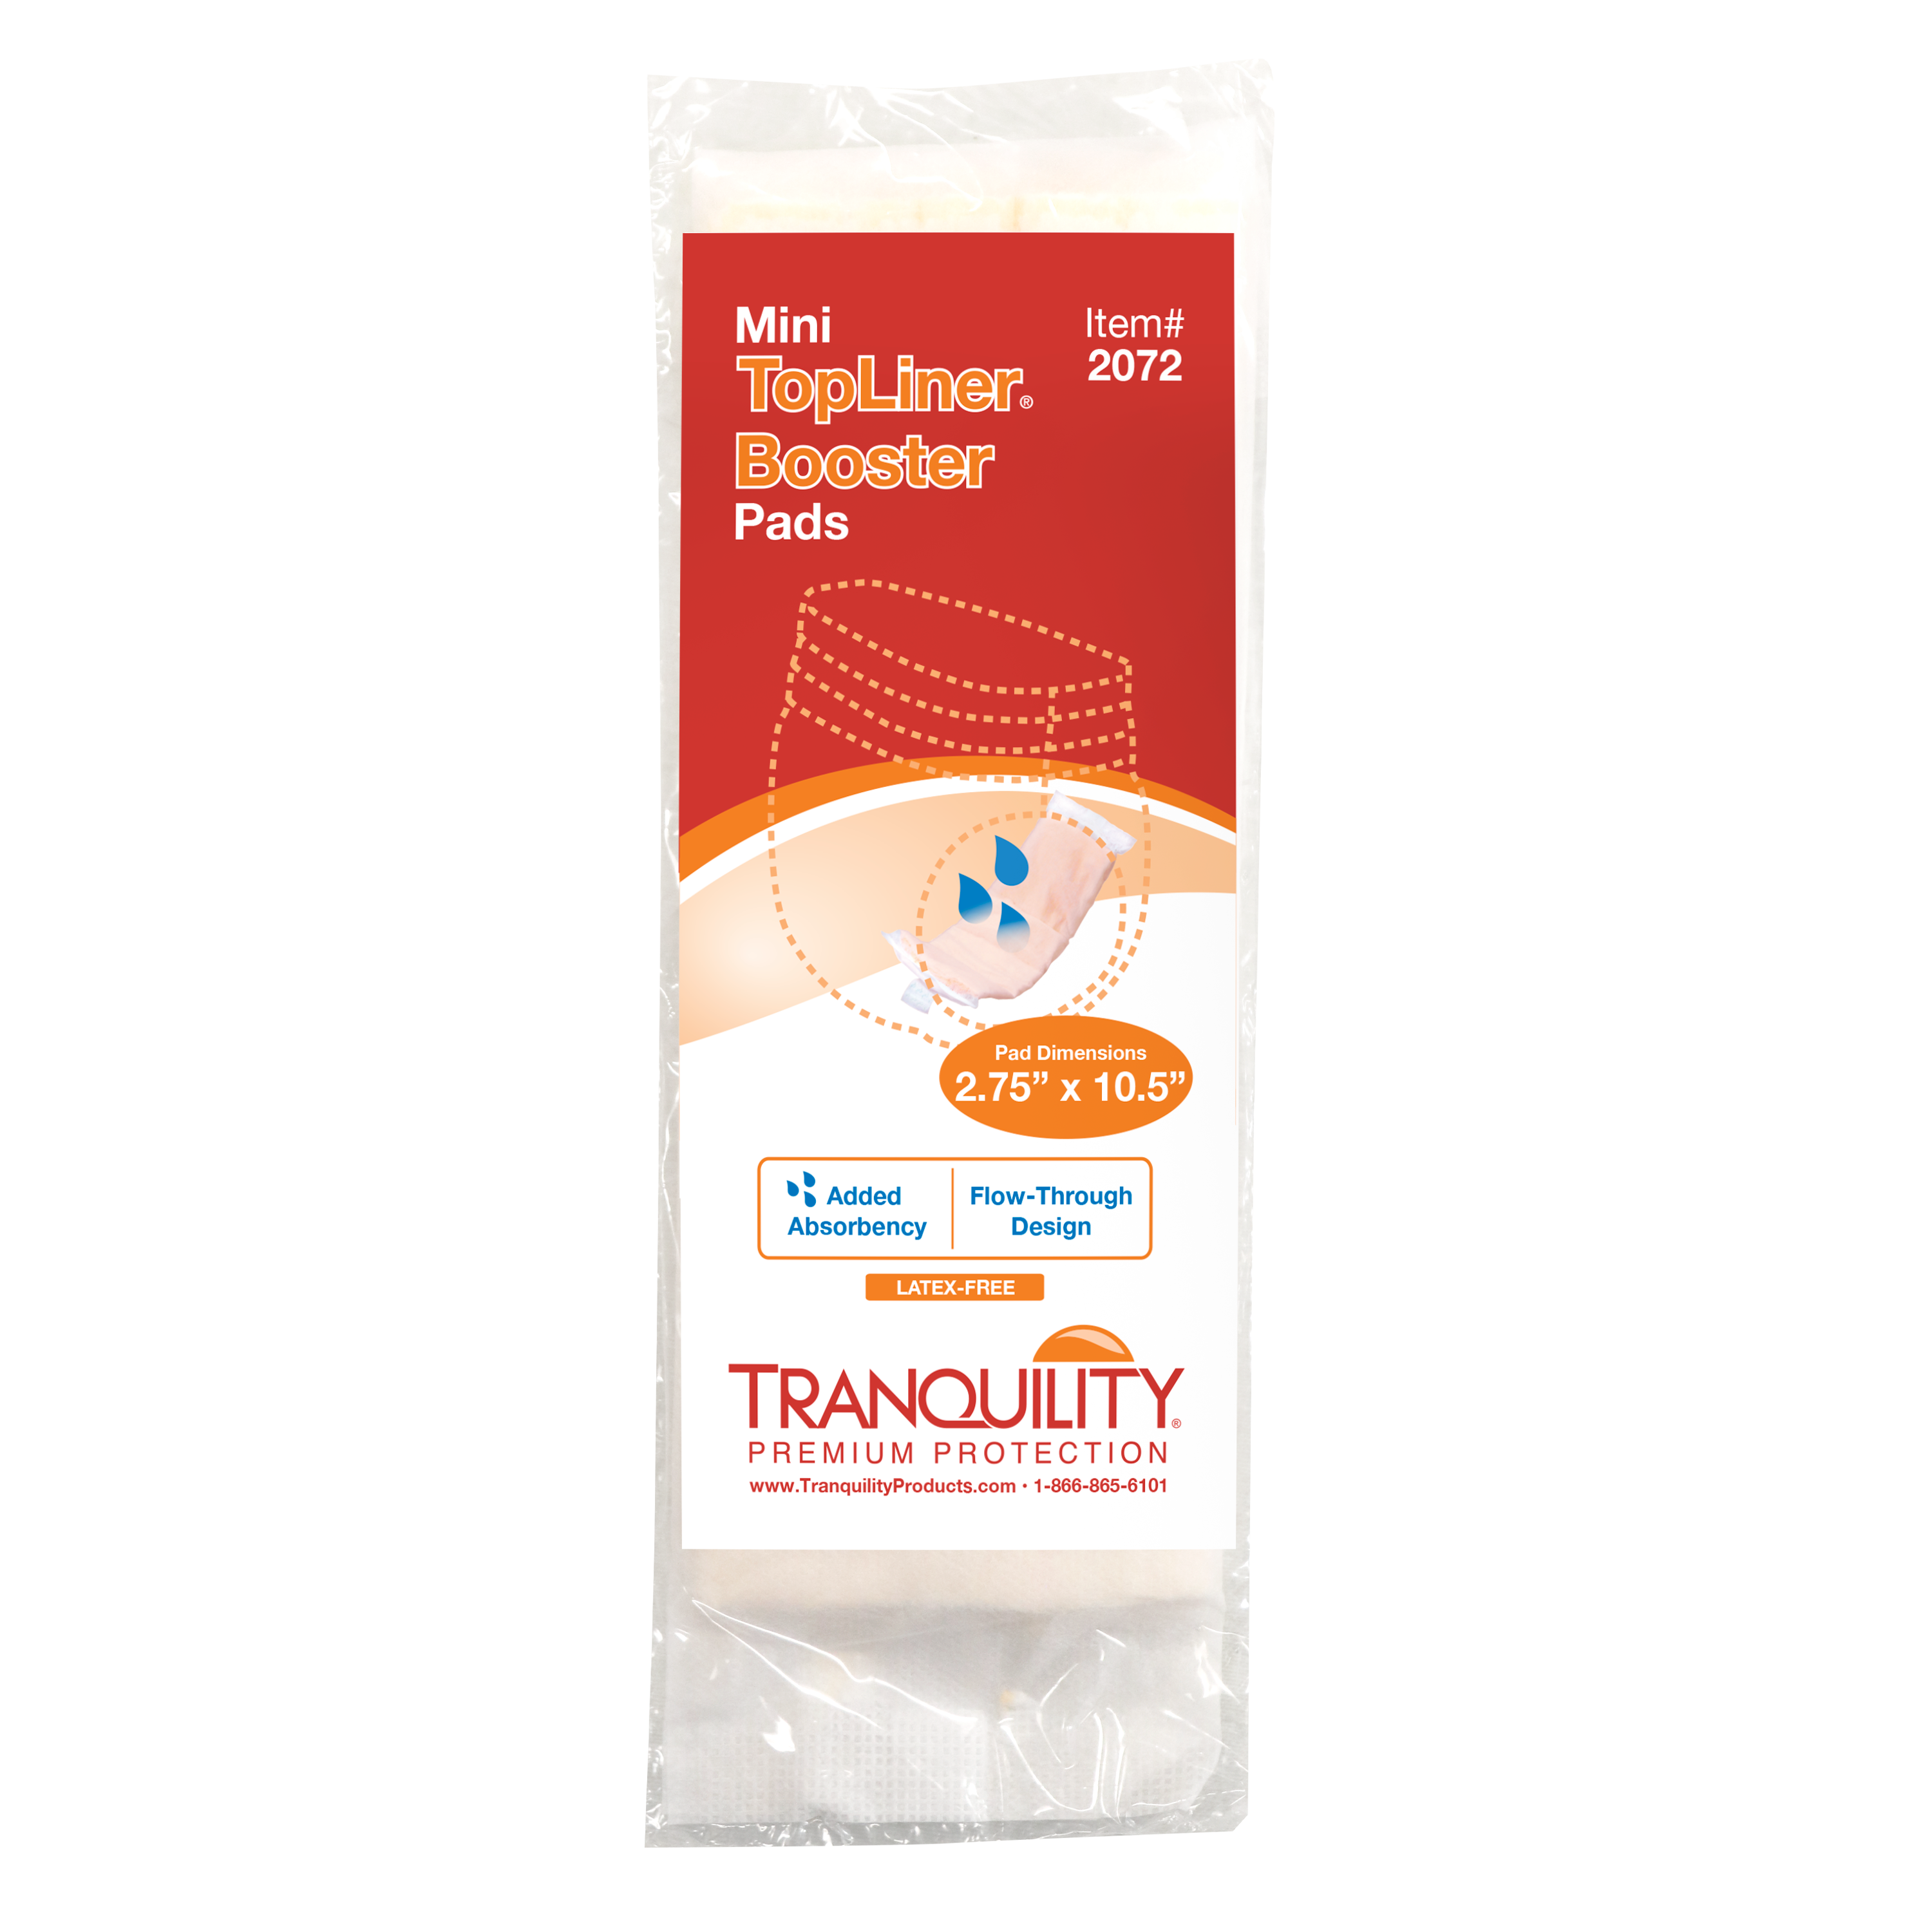 Tranquility TopLiner Regular Booster Pad - Wellwise by Shoppers